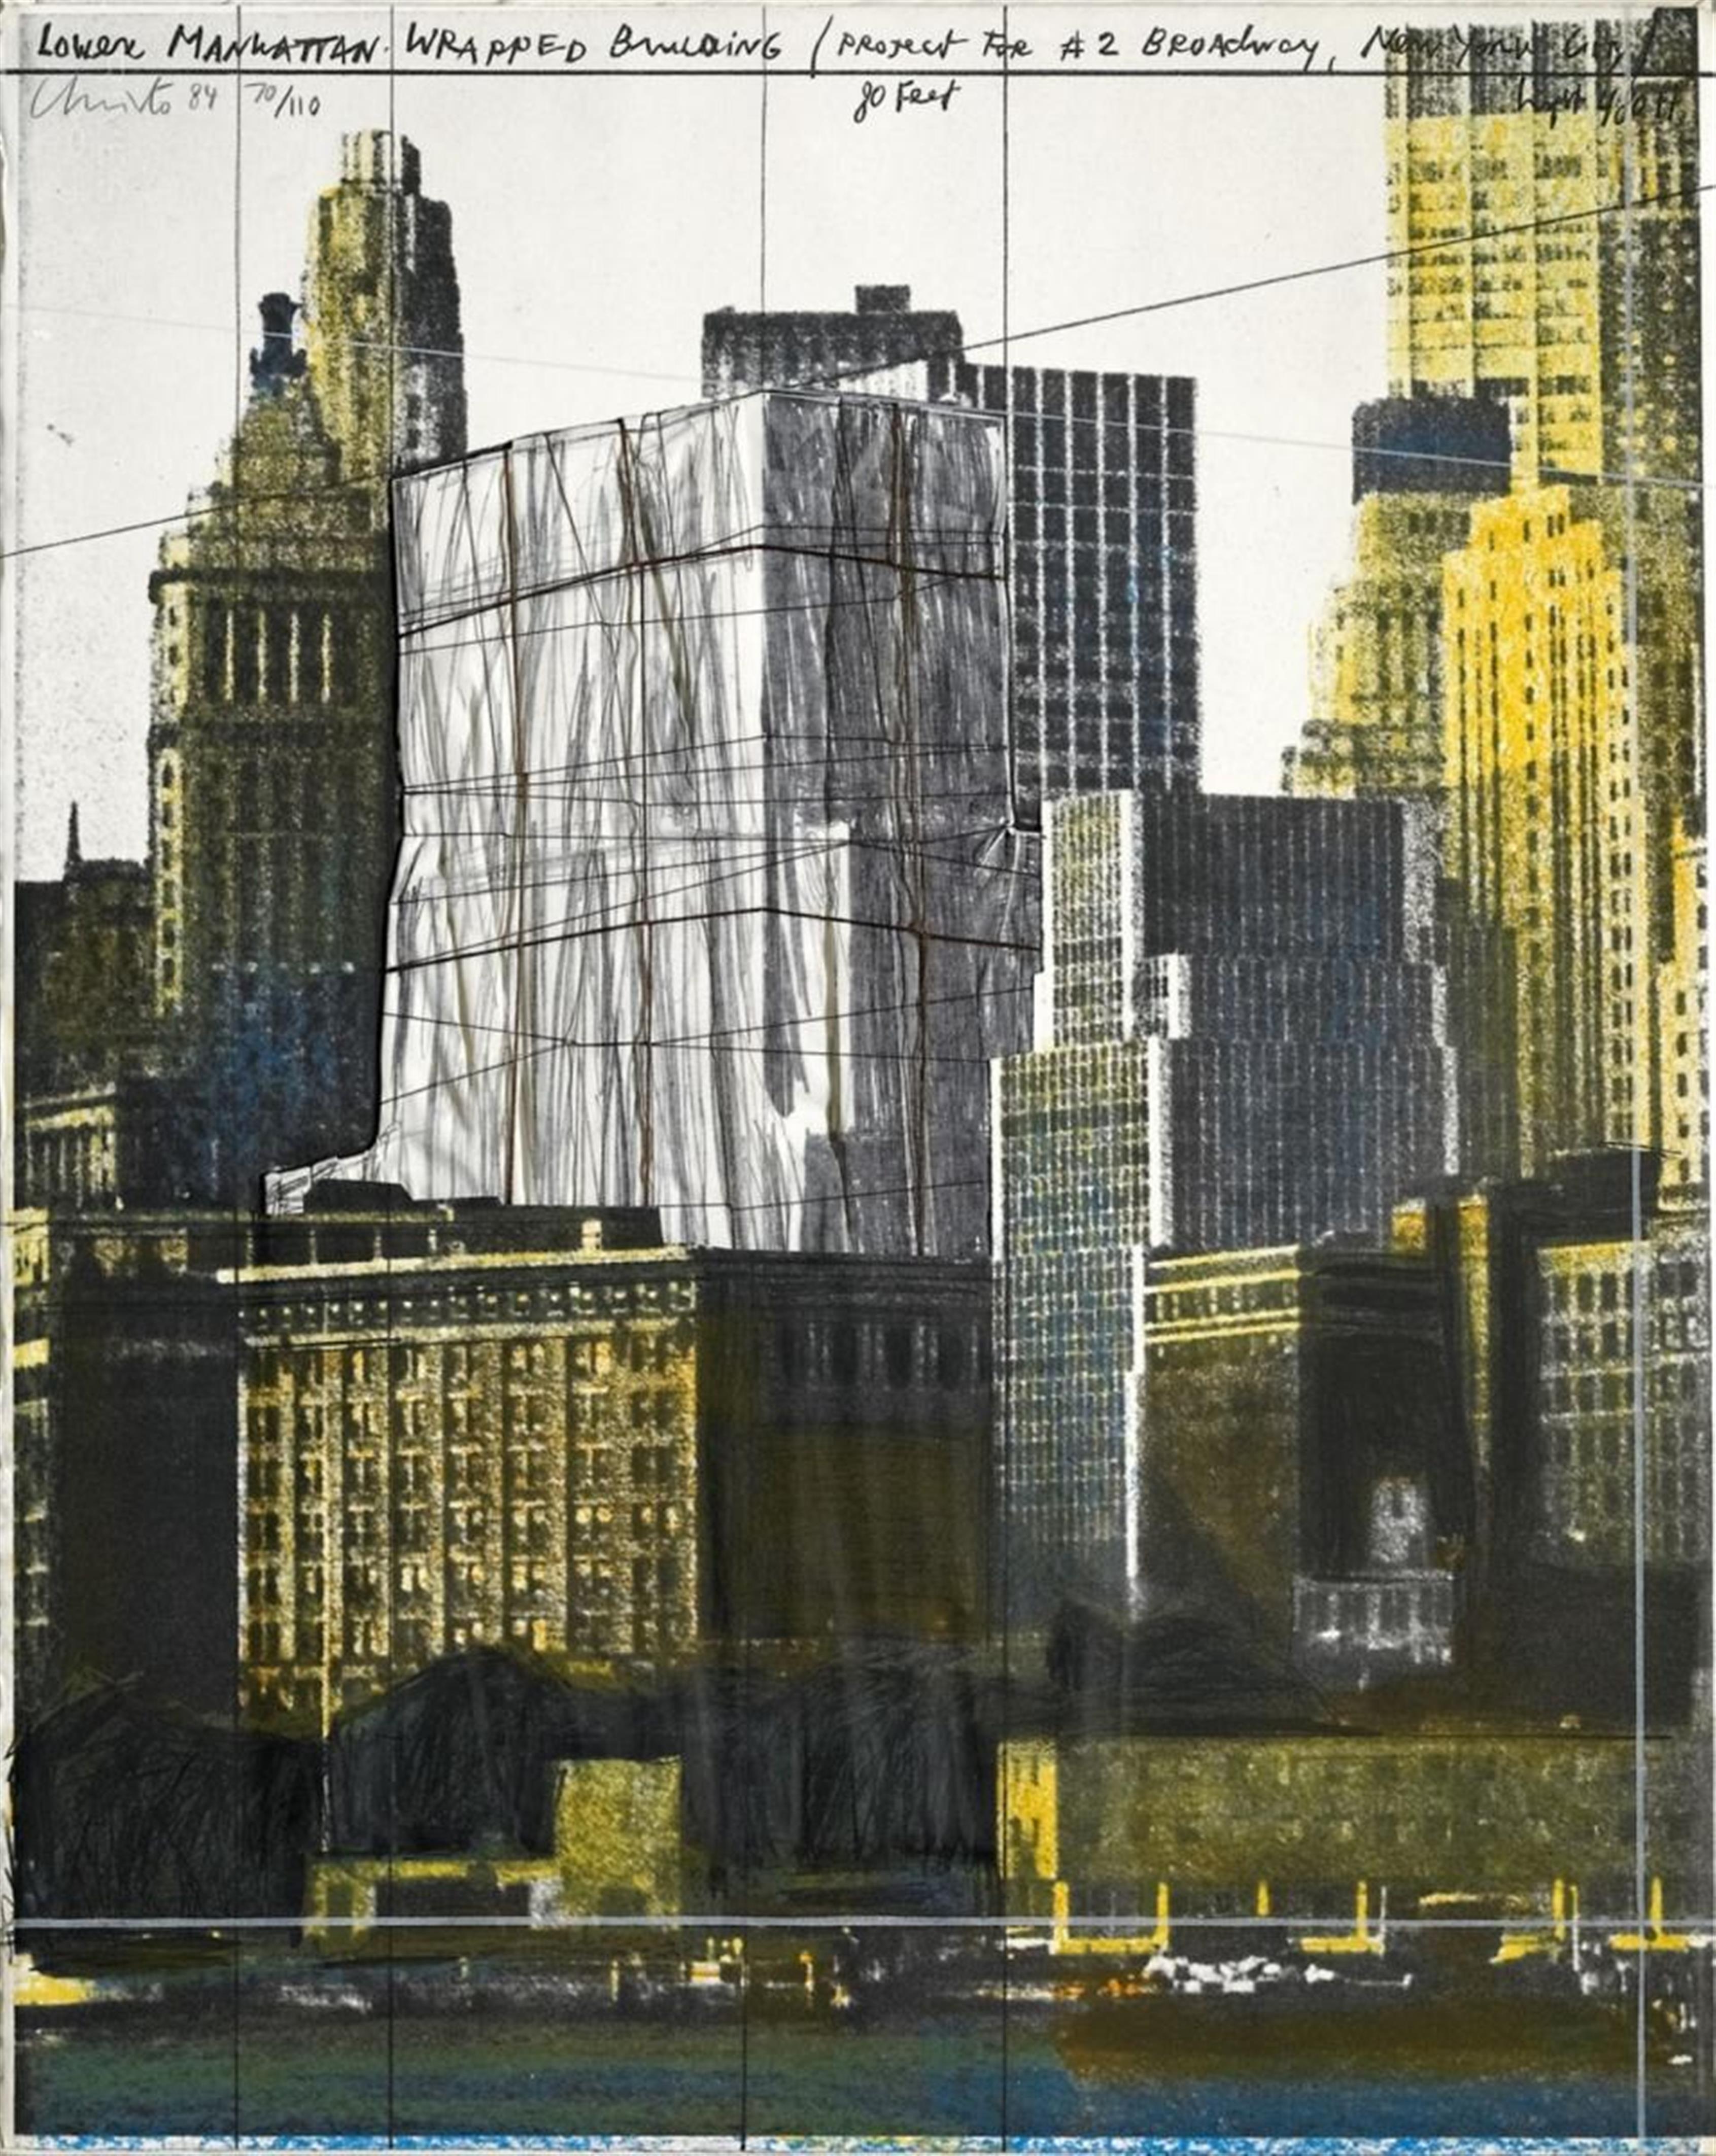 Christo - LOWER MANHATTAN WRAPPED BUILDING, PROJECT FOR 2 BROADWAY, NEW YORK - image-1